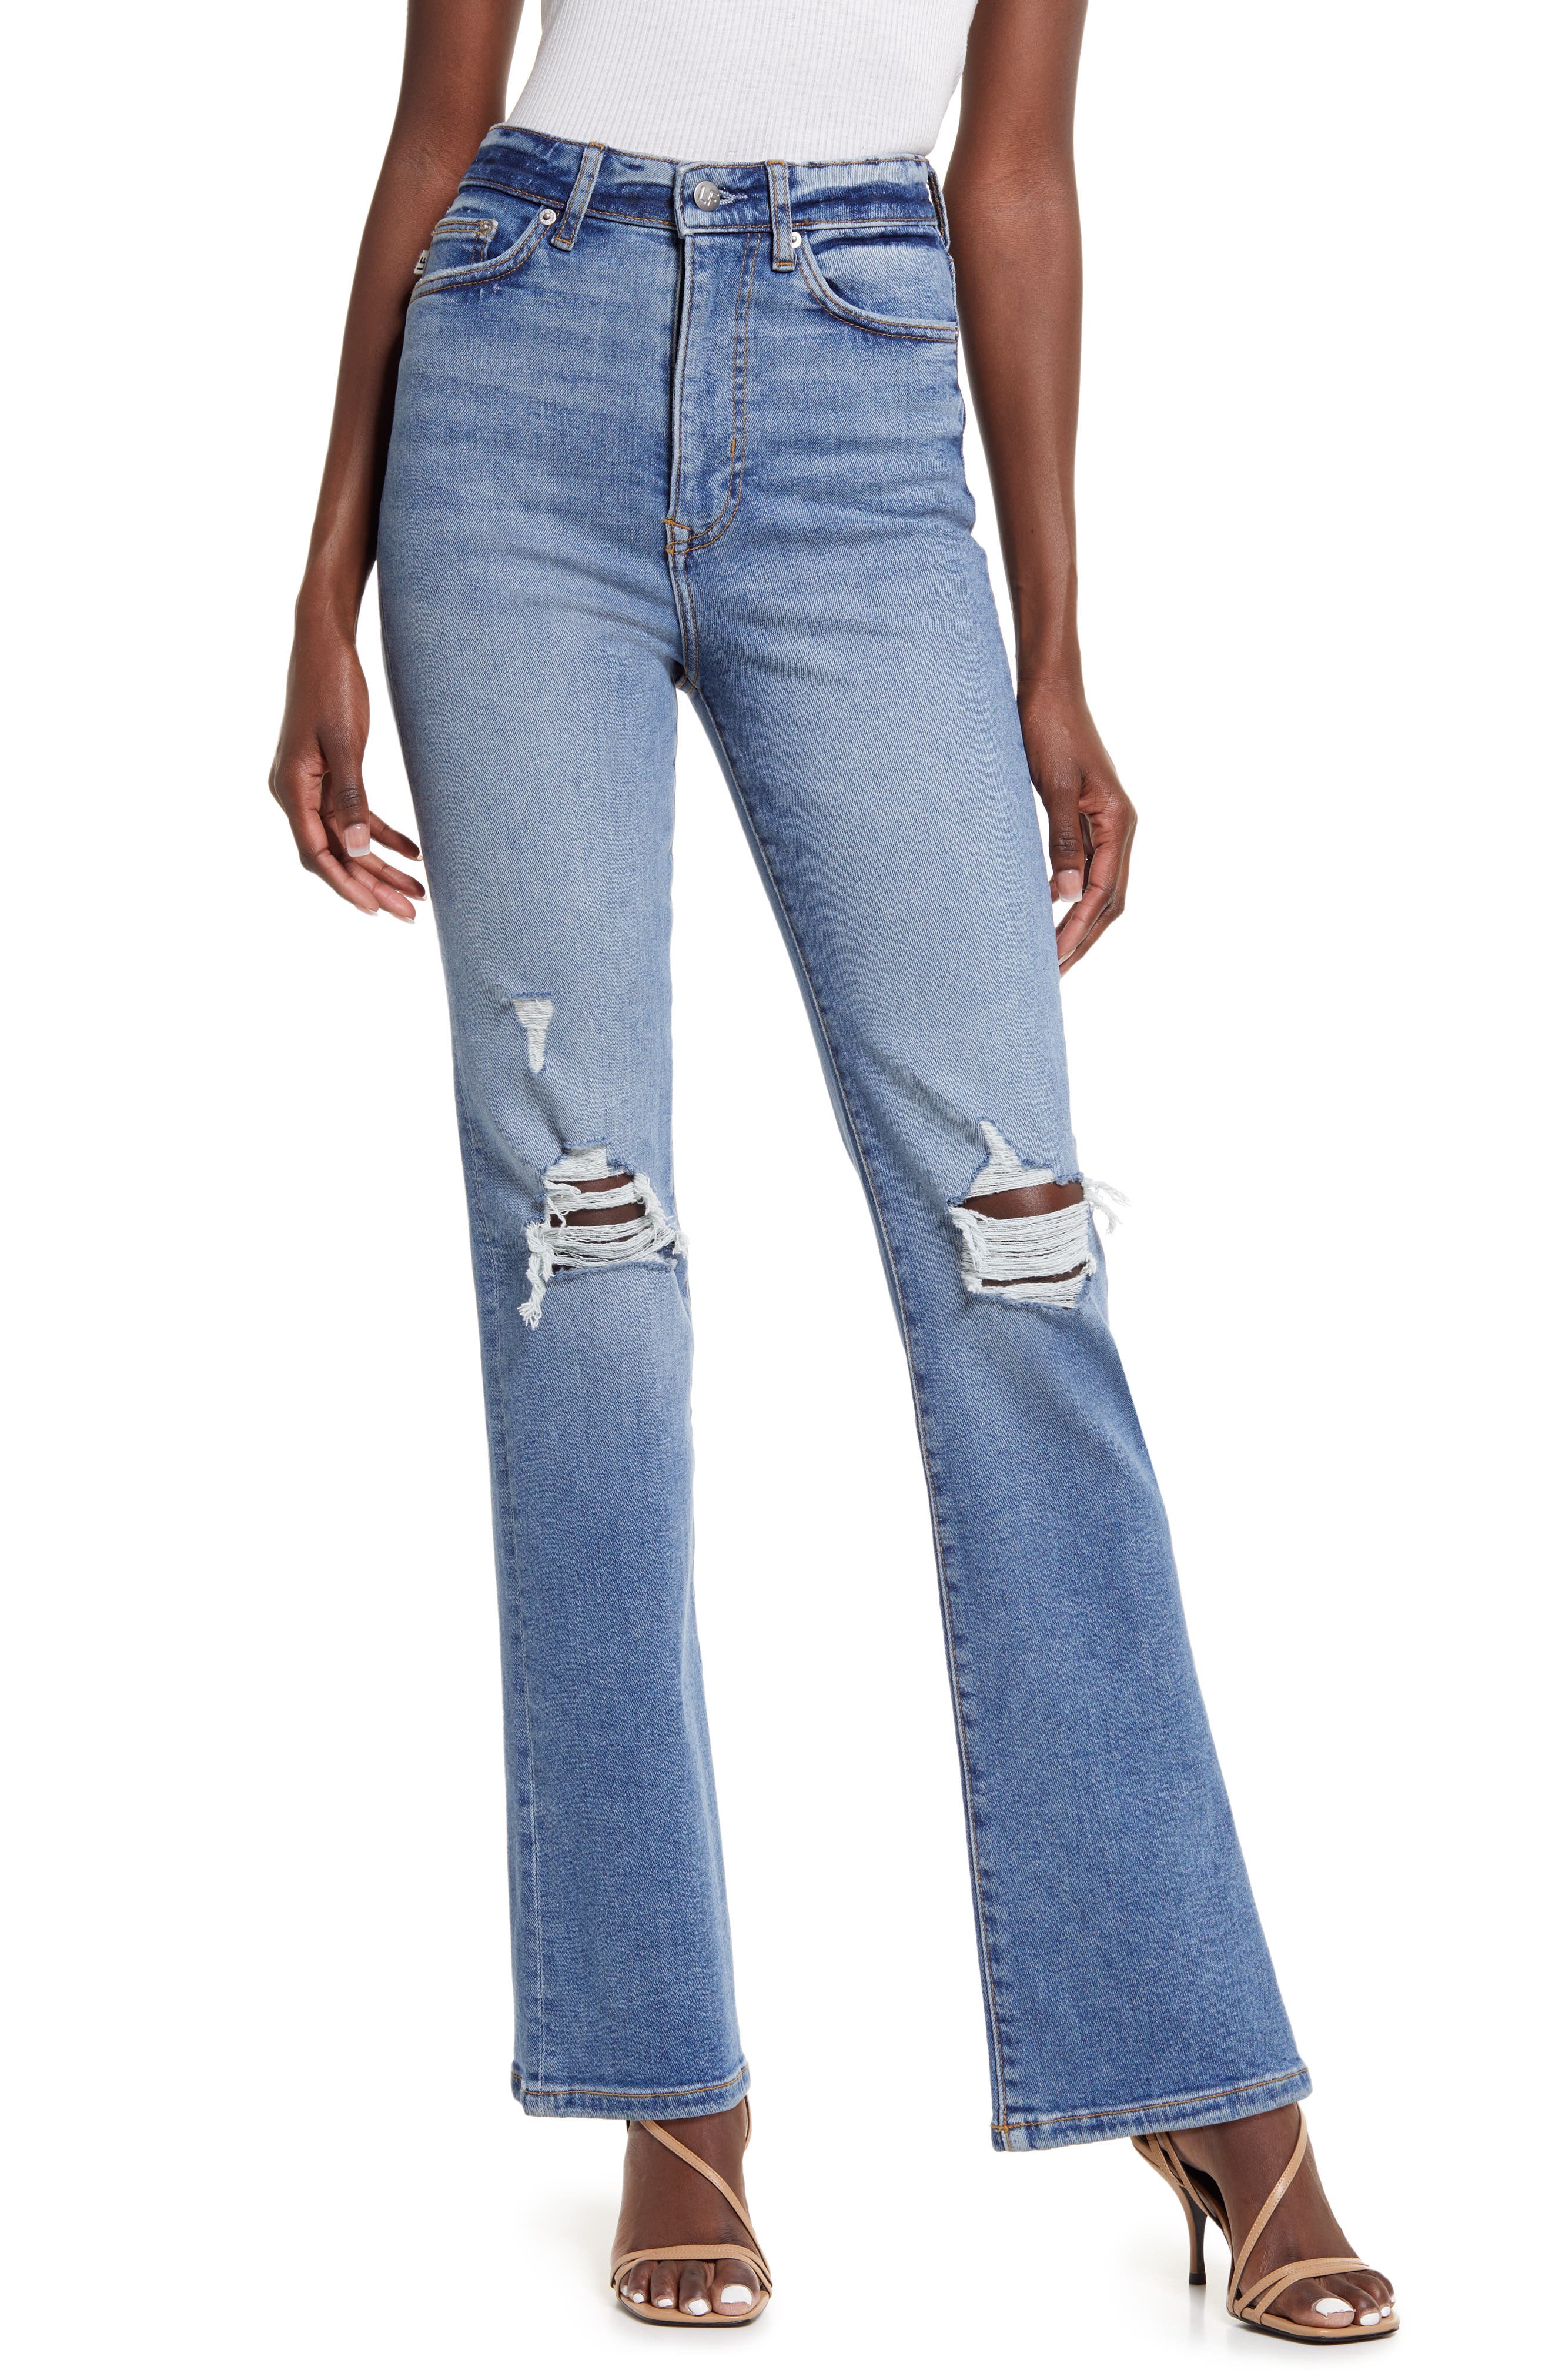 Lovers + Friends Greyson Ripped High Waist Flare Jeans in Capistrano